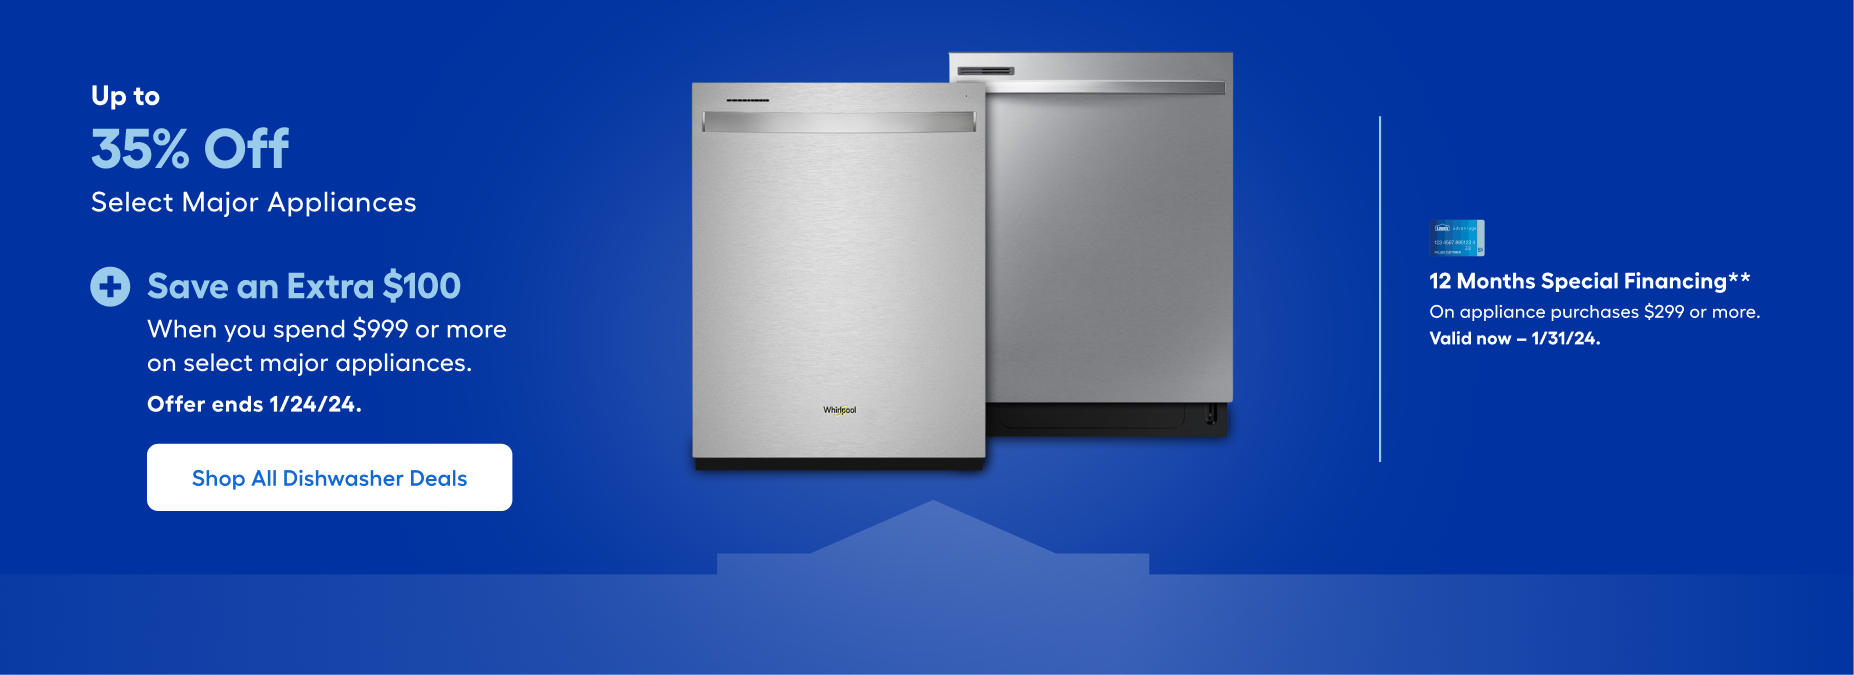 Shop Deep Discount Top Brand Appliances The Used Appliance Store